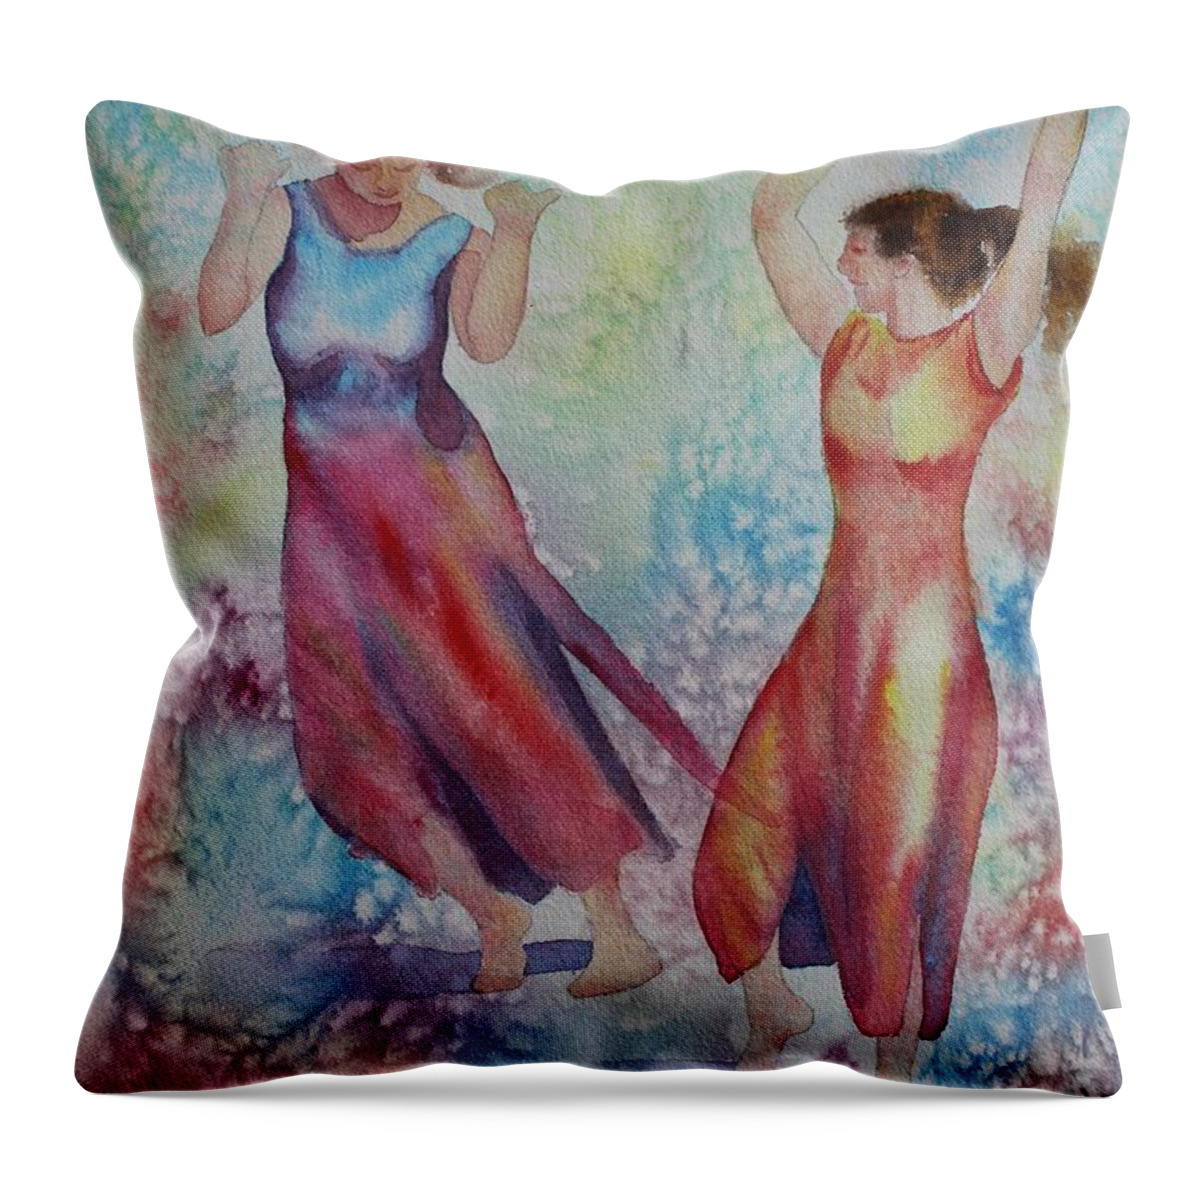 Dance Throw Pillow featuring the painting I Hope You Dance by Ruth Kamenev